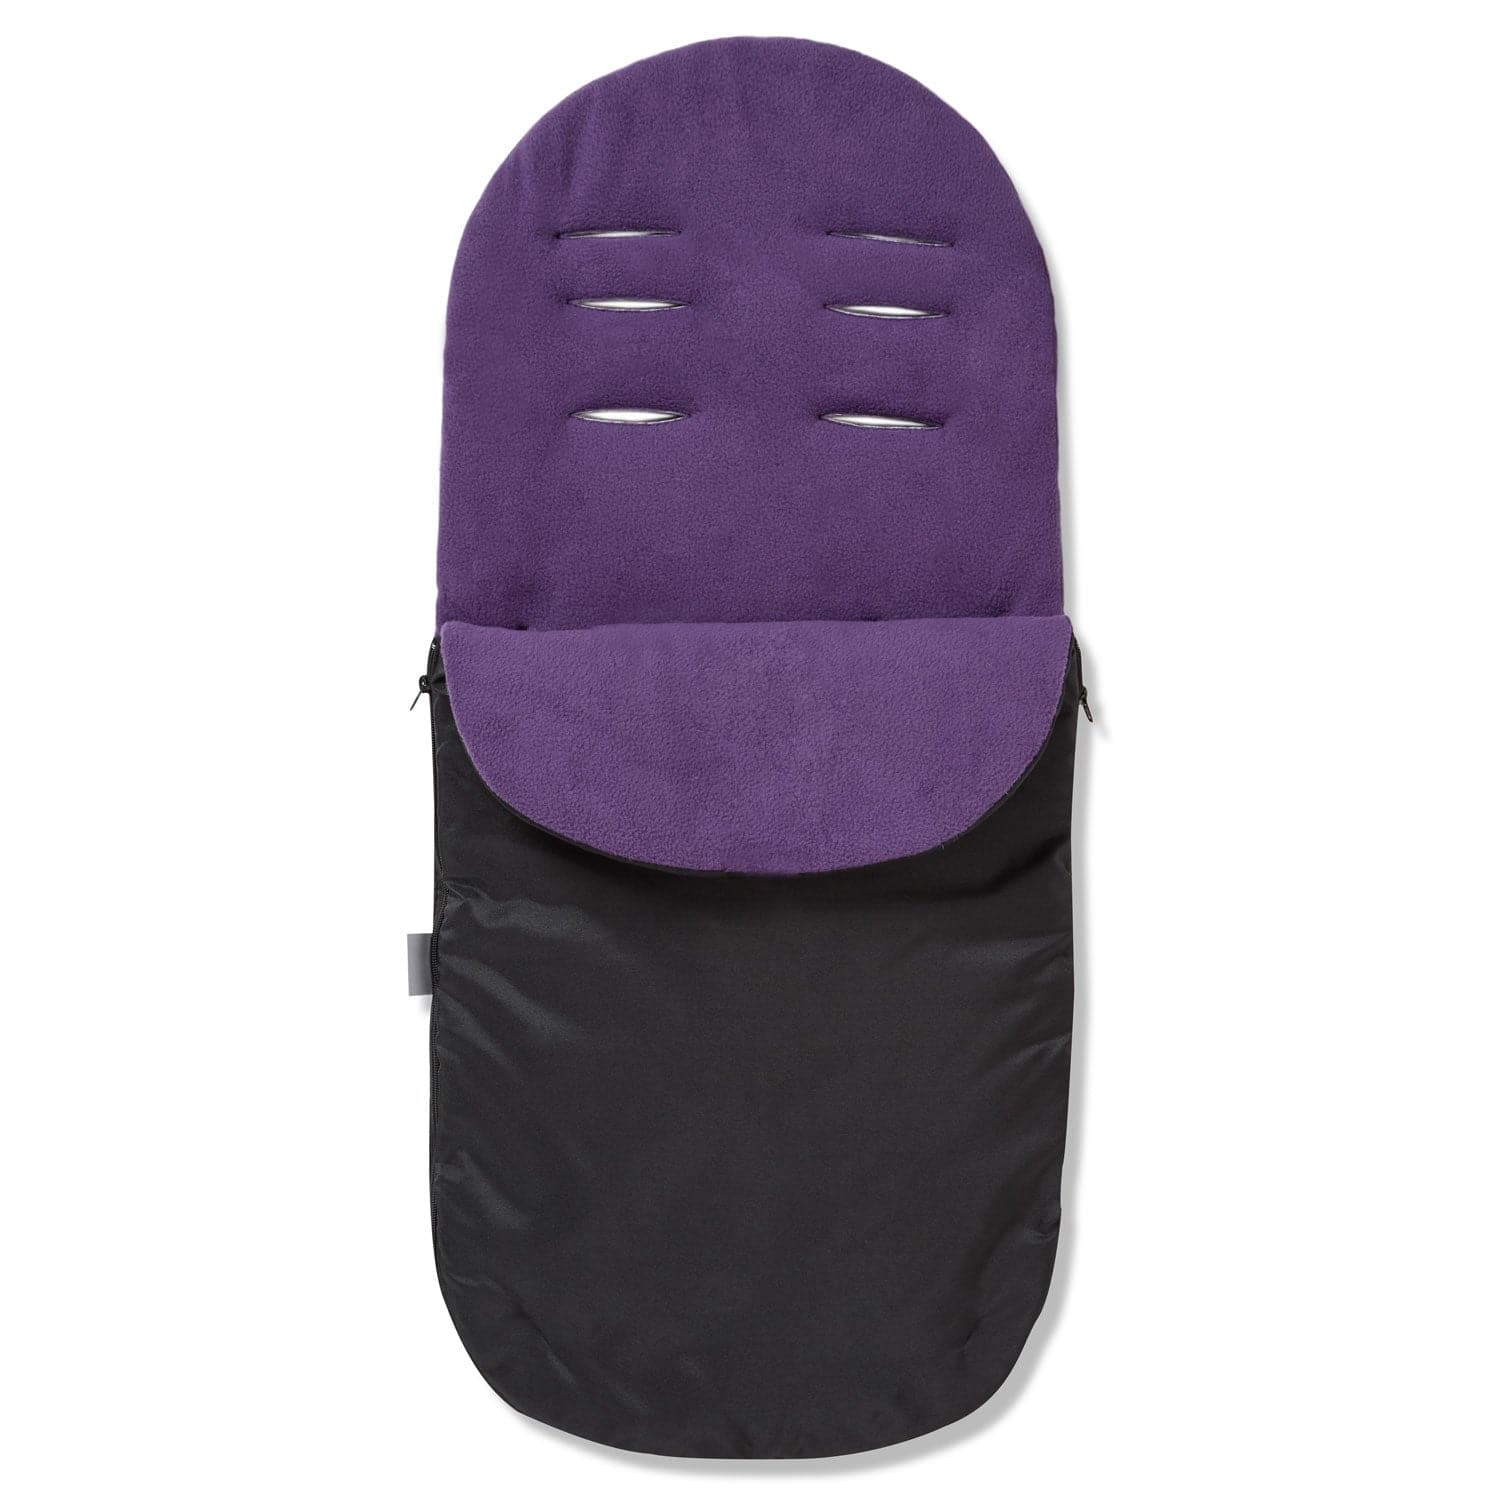 Footmuff / Cosy Toes Compatible with Quinny - Purple / Fits All Models | For Your Little One